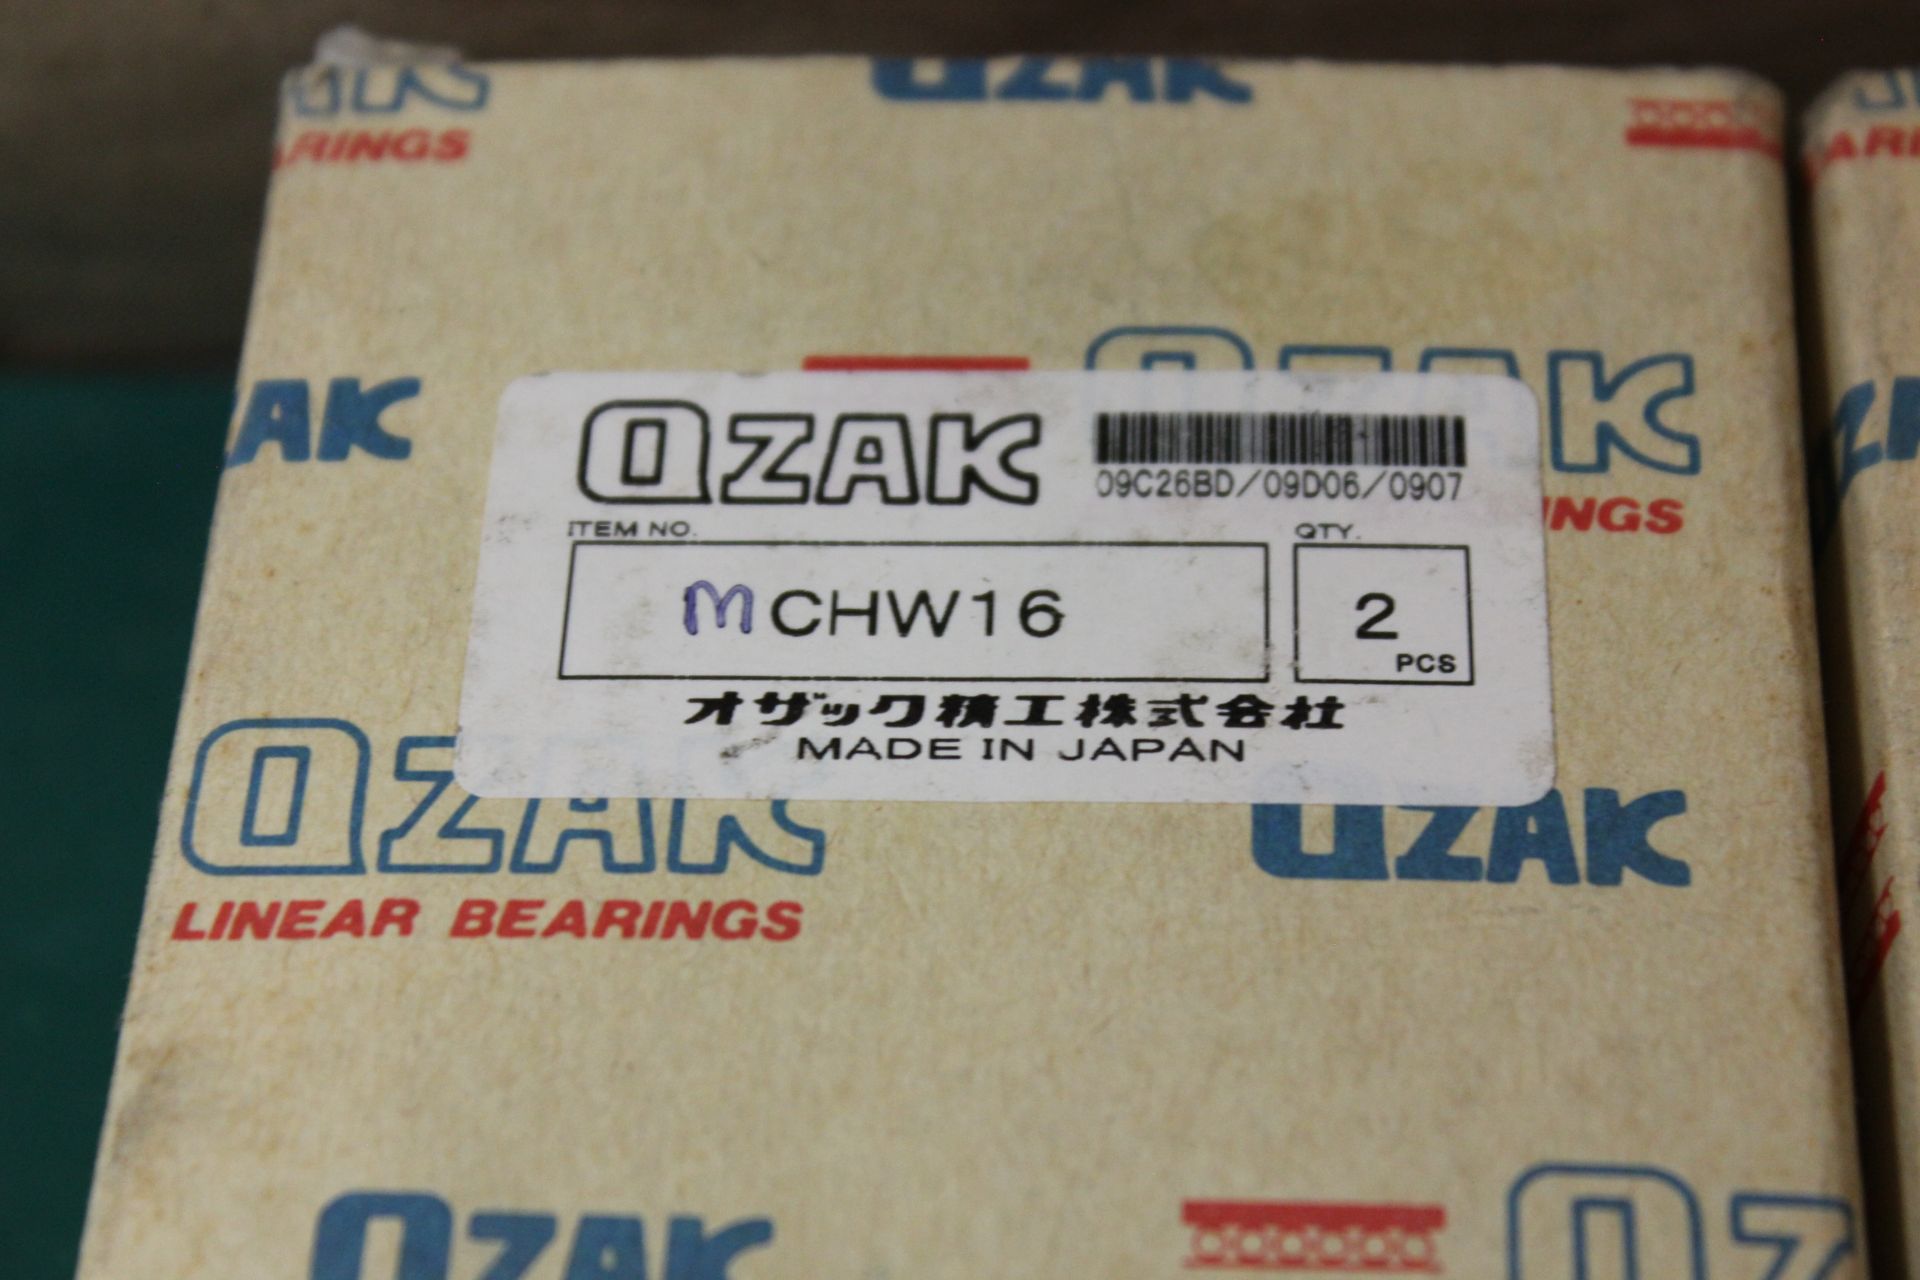 LOT OF OZAK LINEAR BEARINGSMCHW16 AND 6203ZZC3LOC:AS1-1-B2-19" - Image 3 of 4